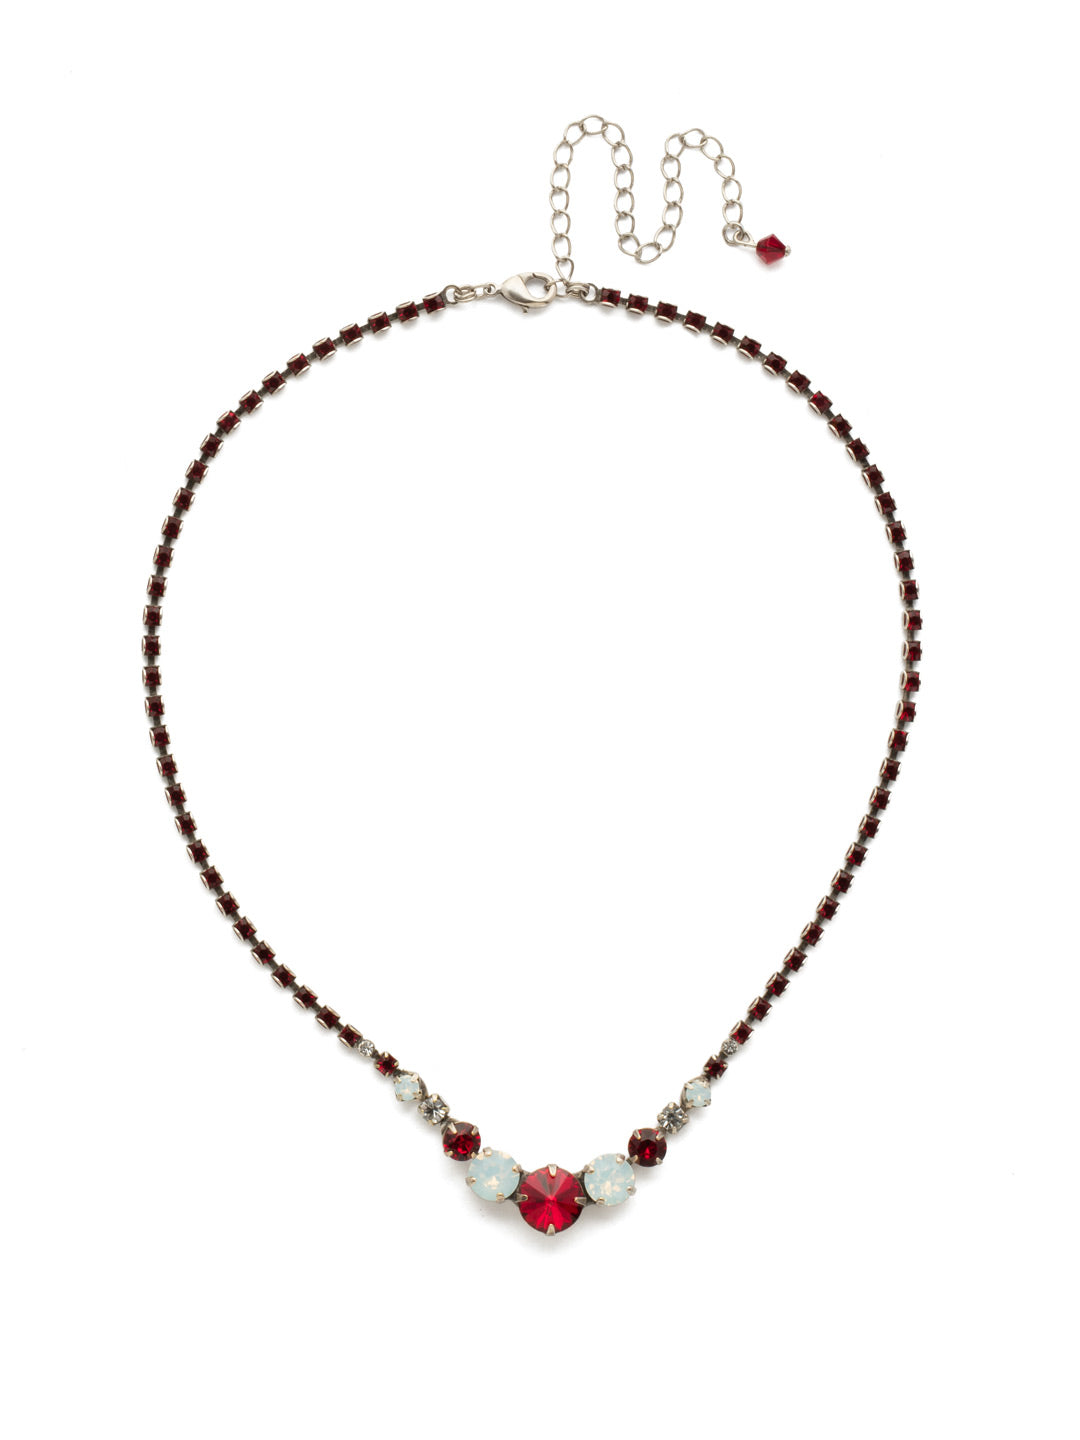 Round Up Necklace - NDU47ASCP - Petite round crystals in a variety of settings adorn six larger crystal orbs to form this sleek style.